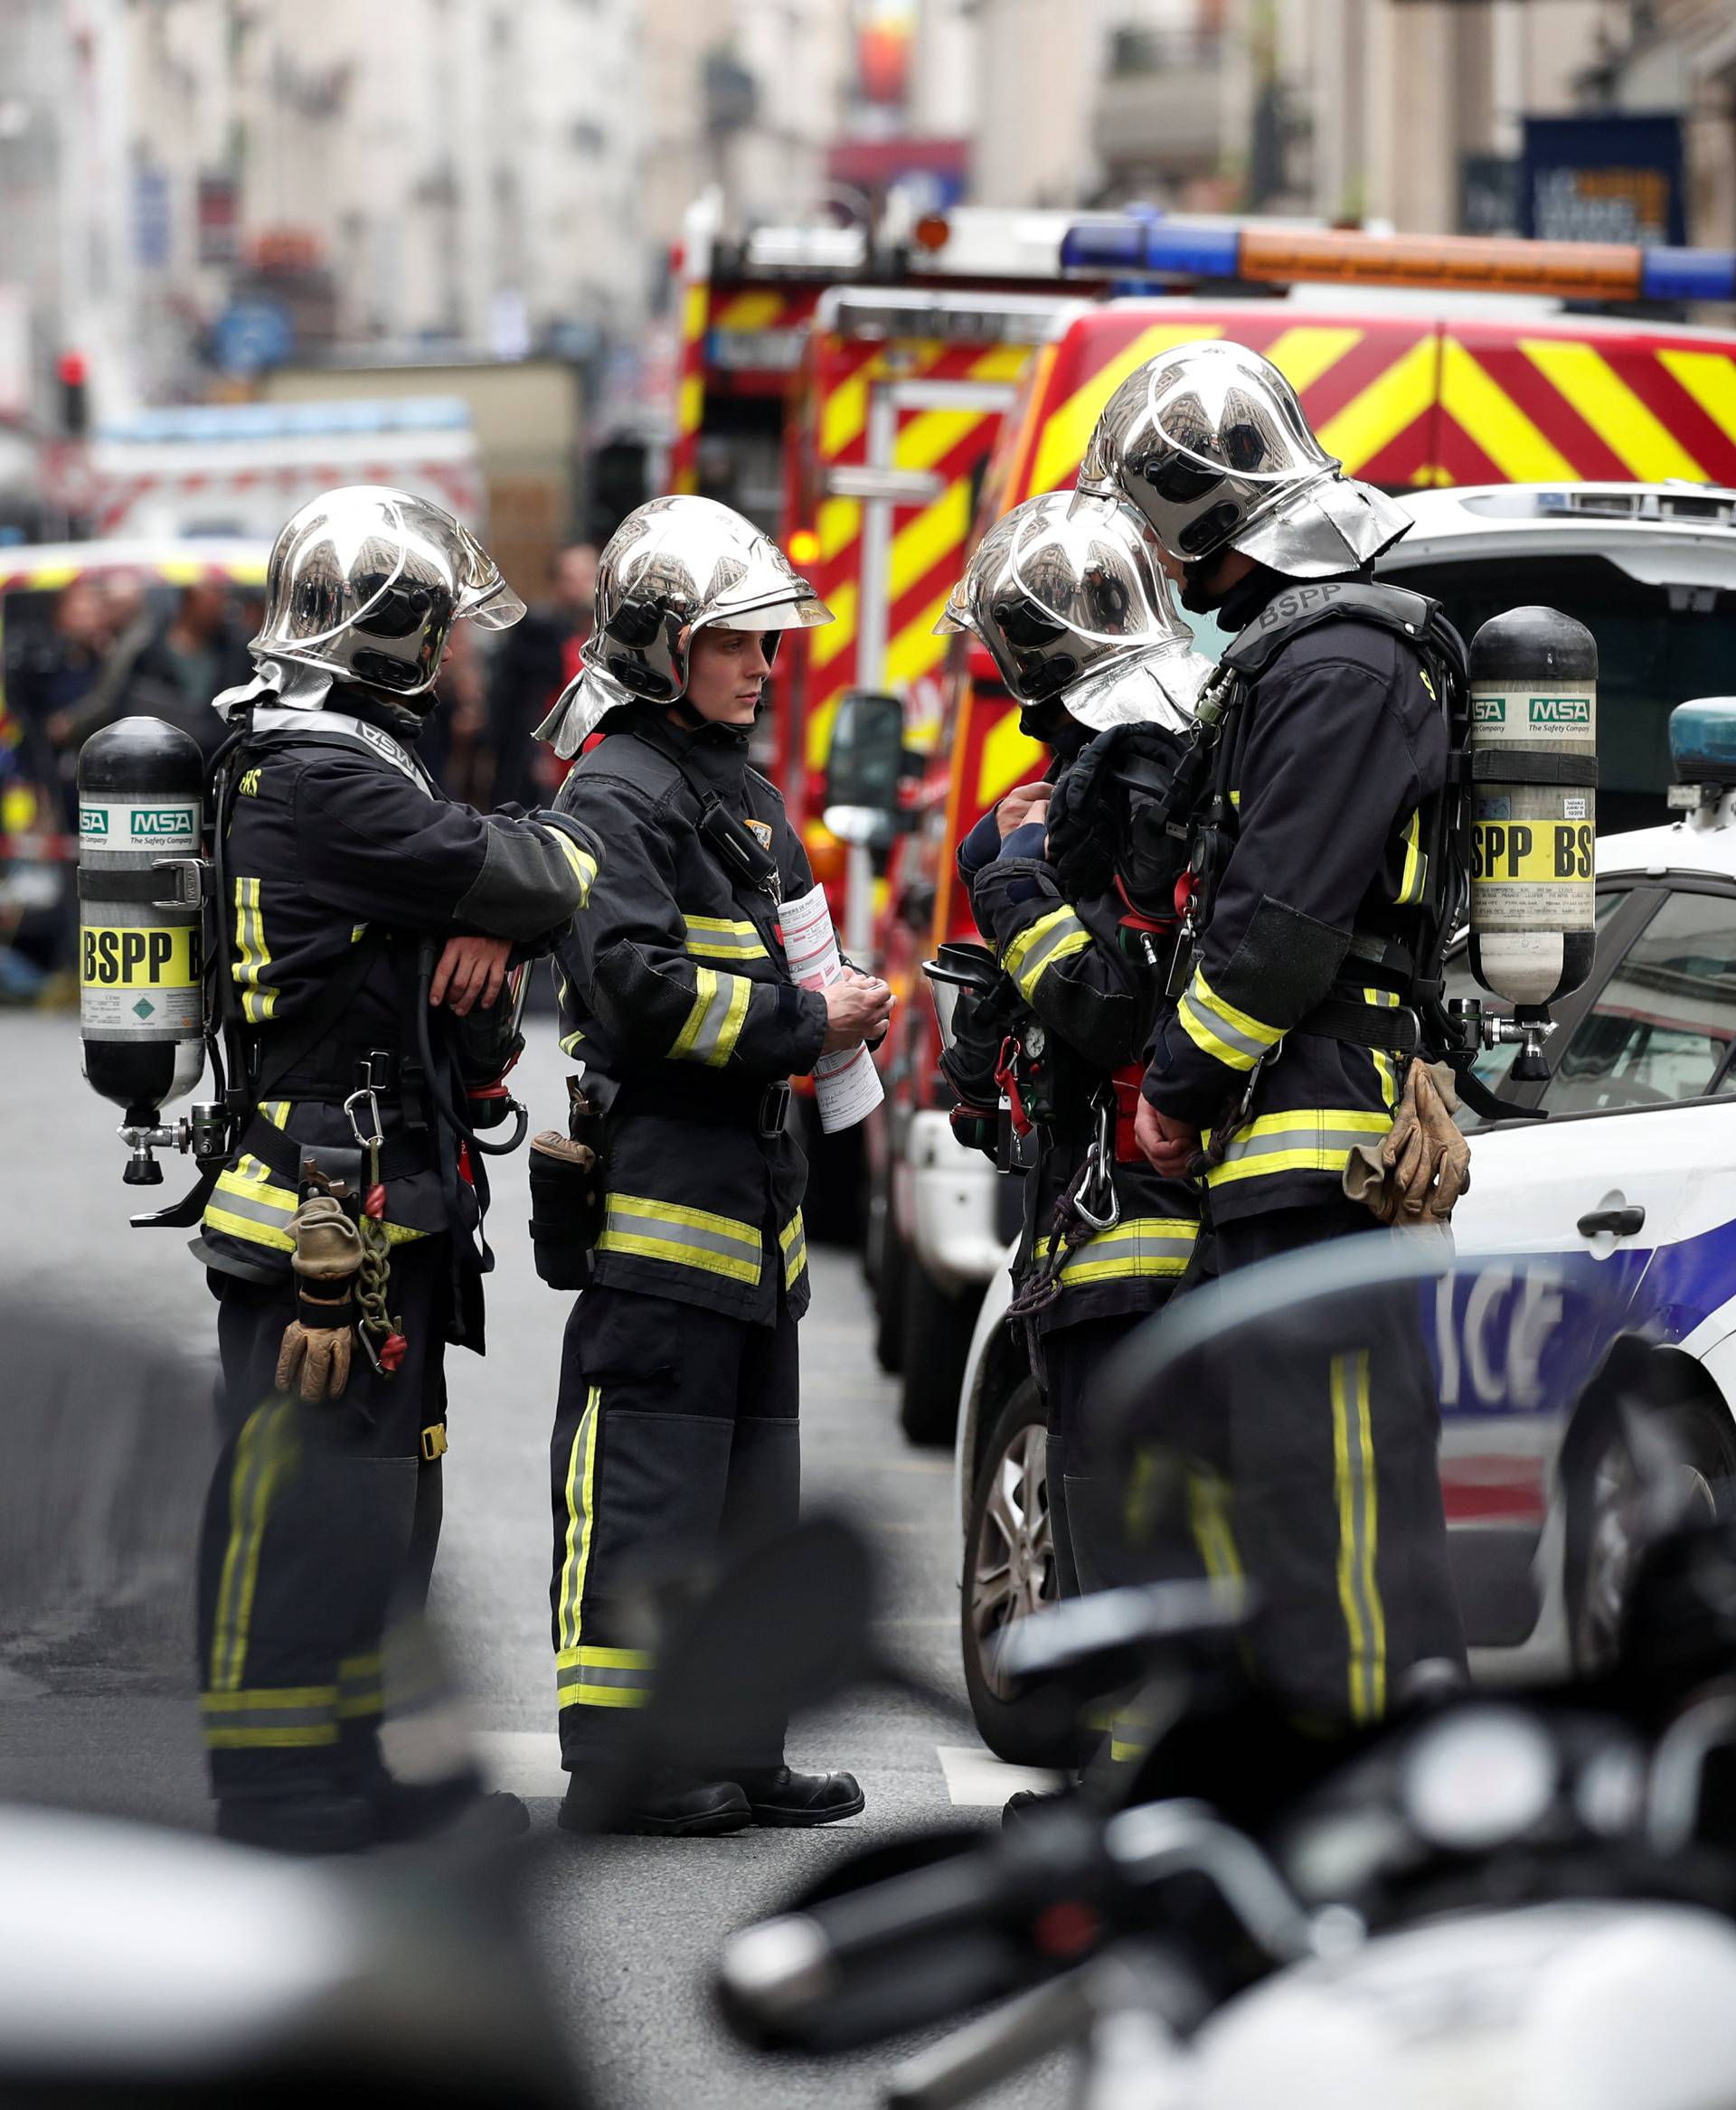 French police and firemen secure the street as a man has taken people hostage at a business in Paris